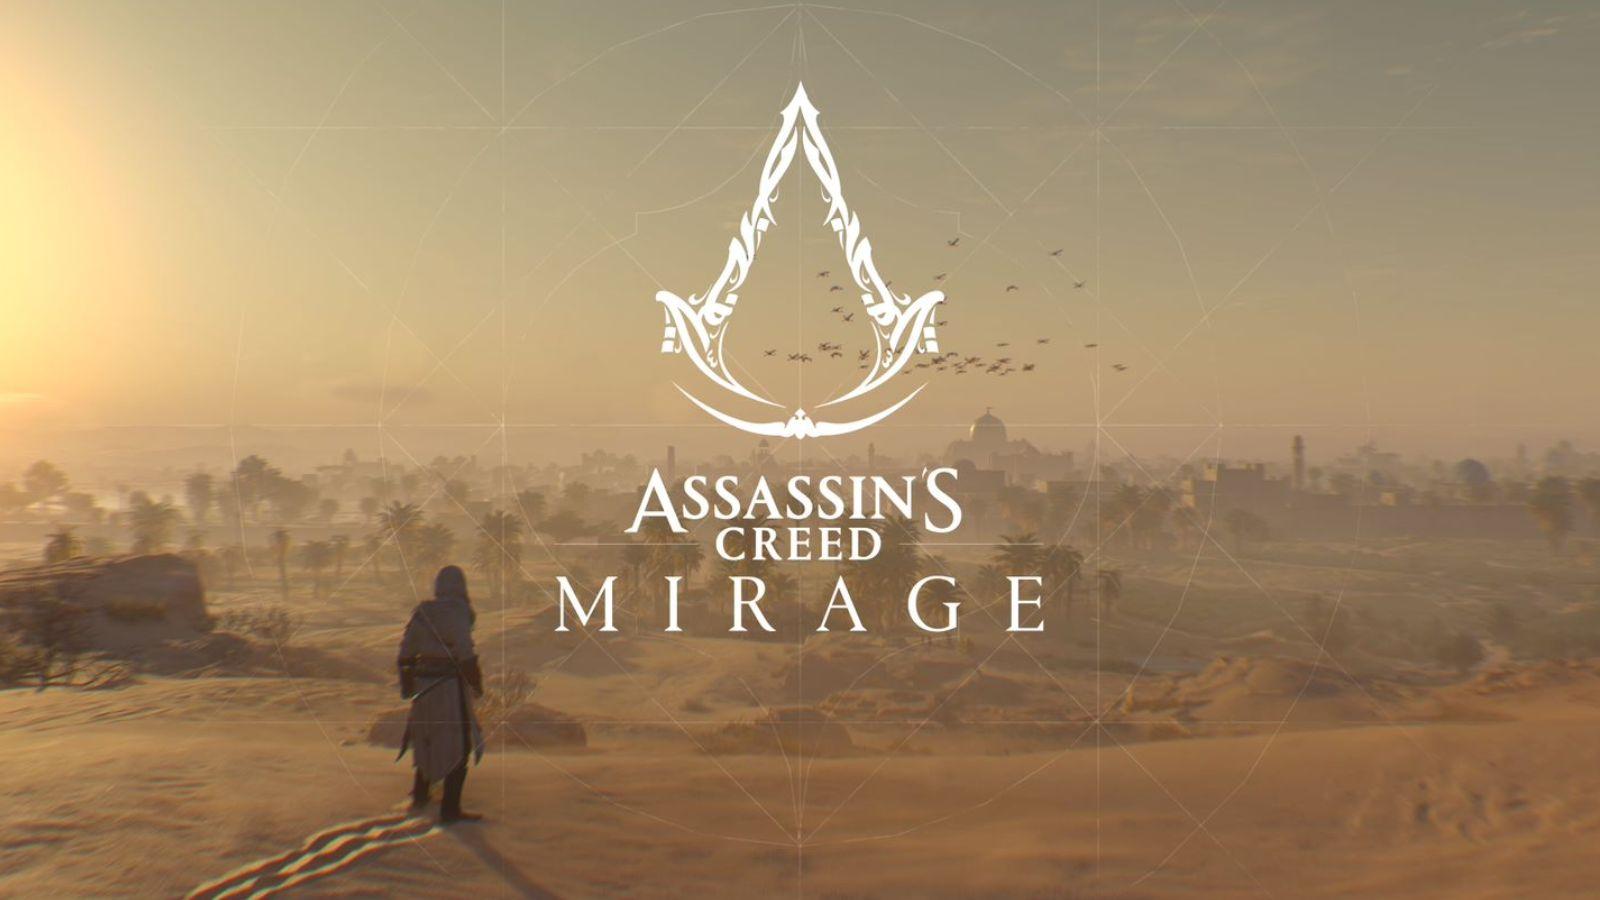 Assassin's Creed Mirage review: In with the old & out with the new - Dexerto